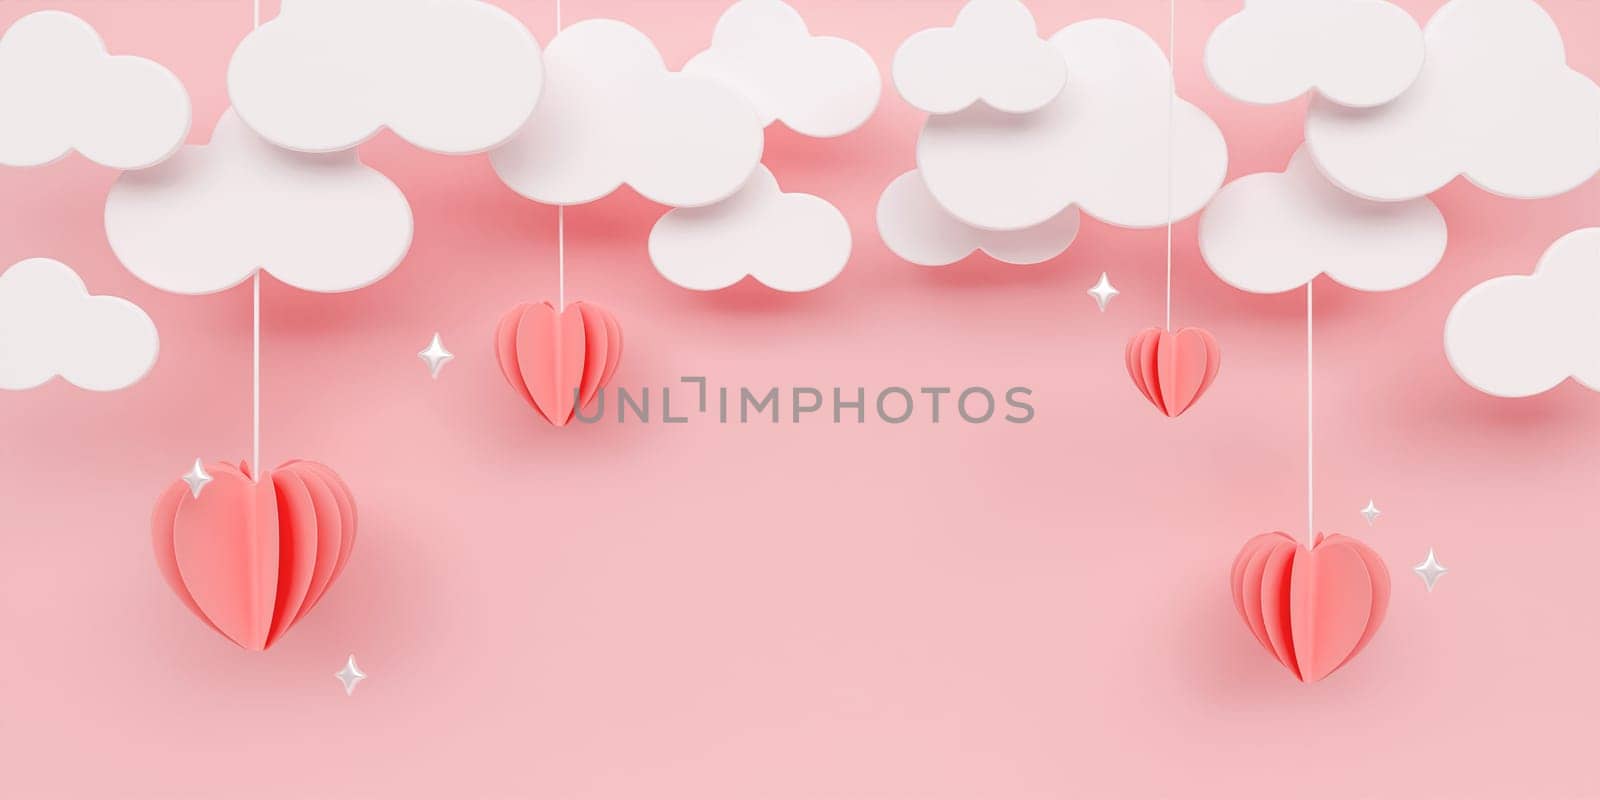 Poster or banner with pink pastel sky and paper cut clouds. Copy space for text. Happy Valentine's day sale header or voucher template with hanging hearts. 3D render illustration by meepiangraphic